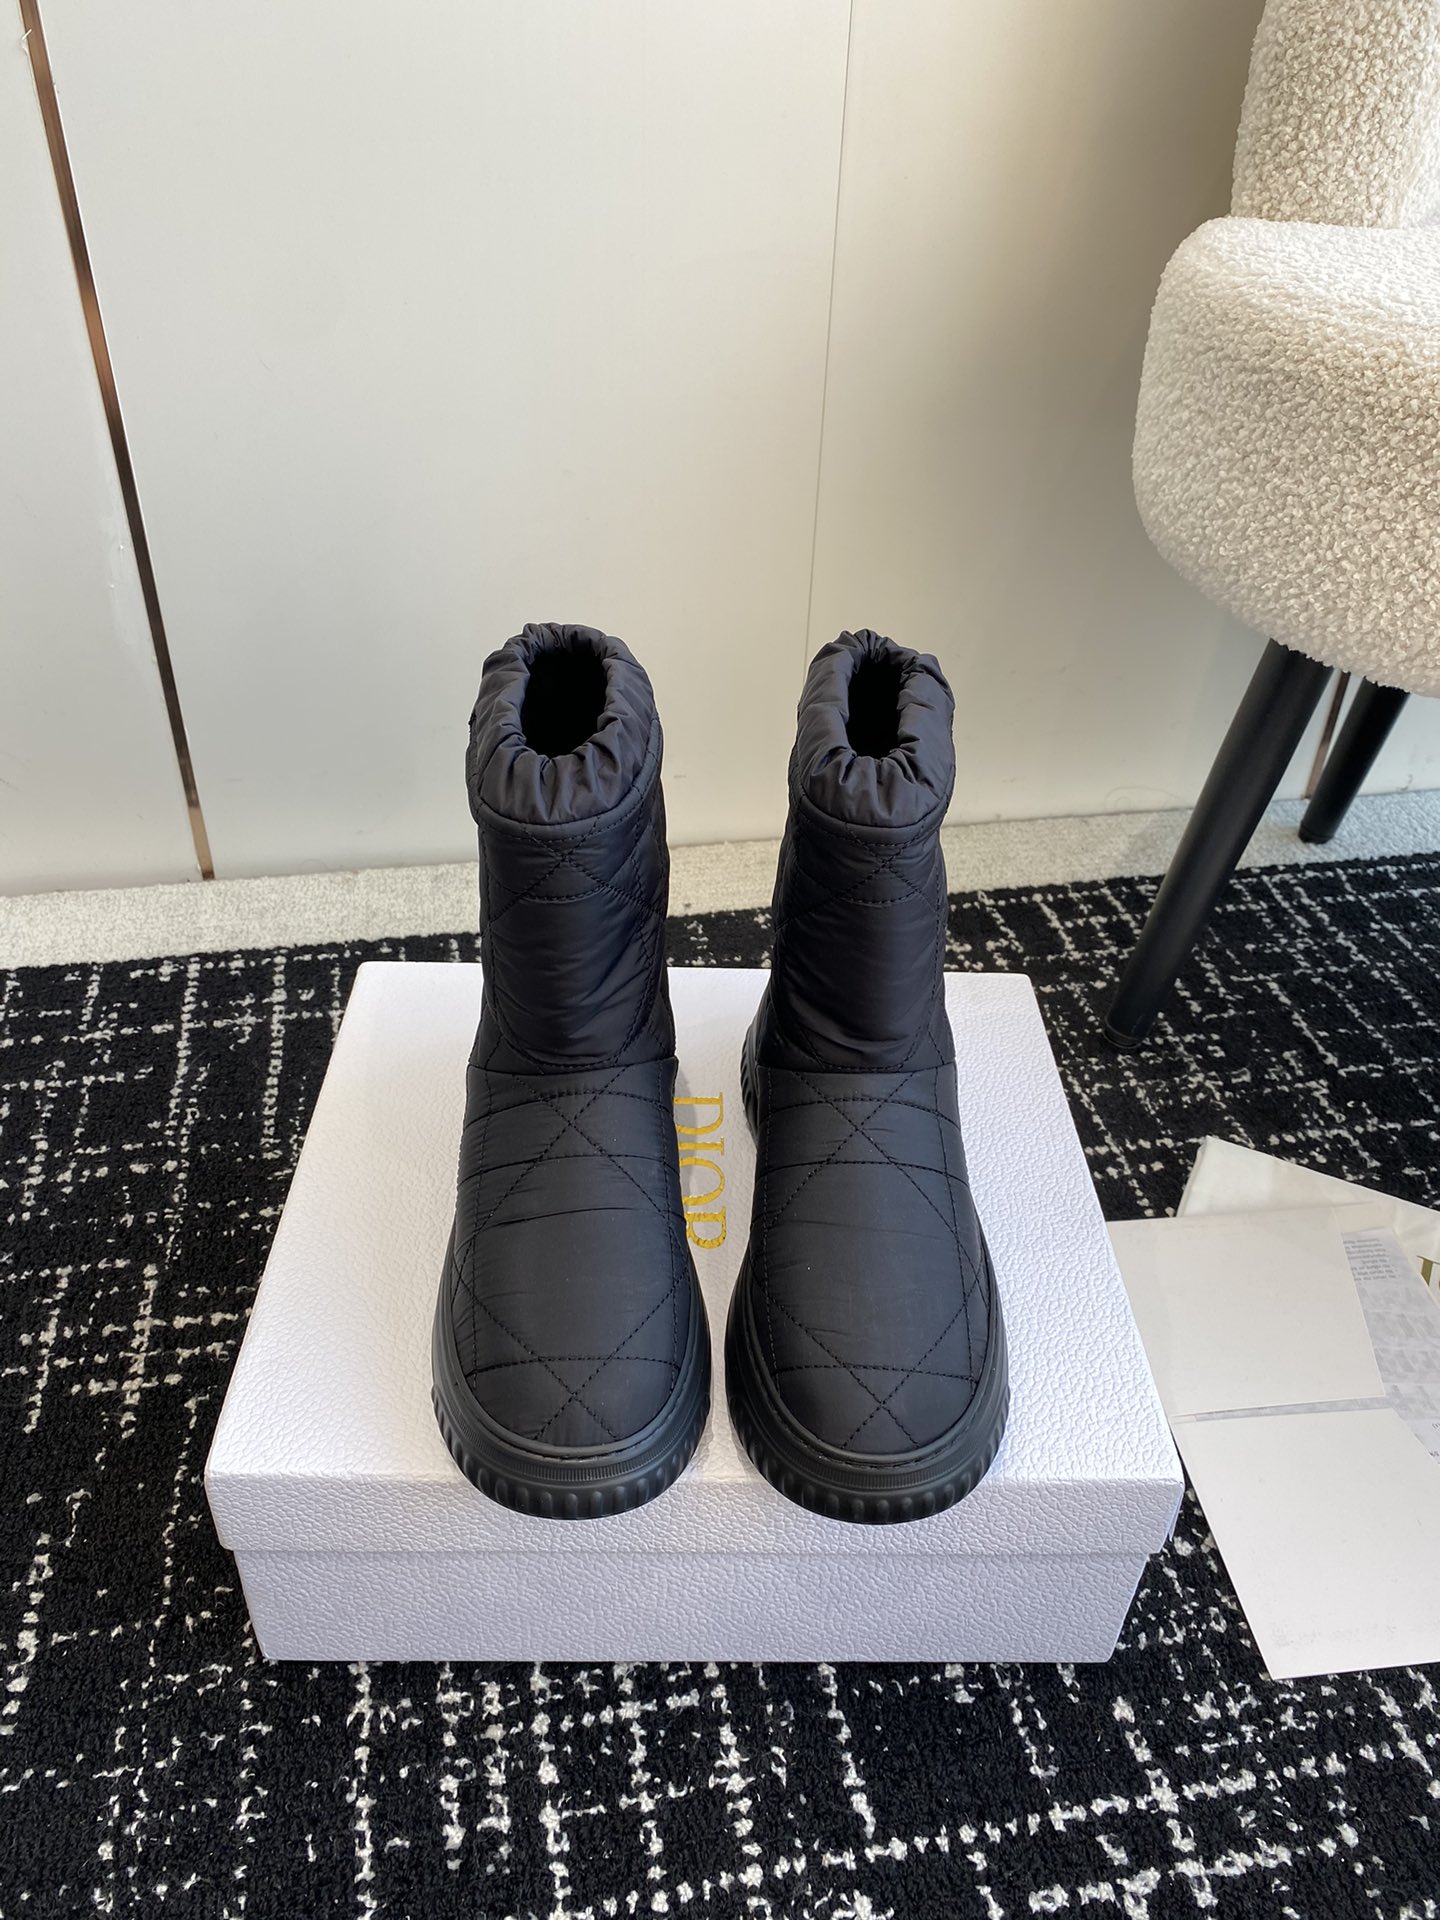 Dior Snow Boots Buy the Best High Quality Replica
 Fall/Winter Collection